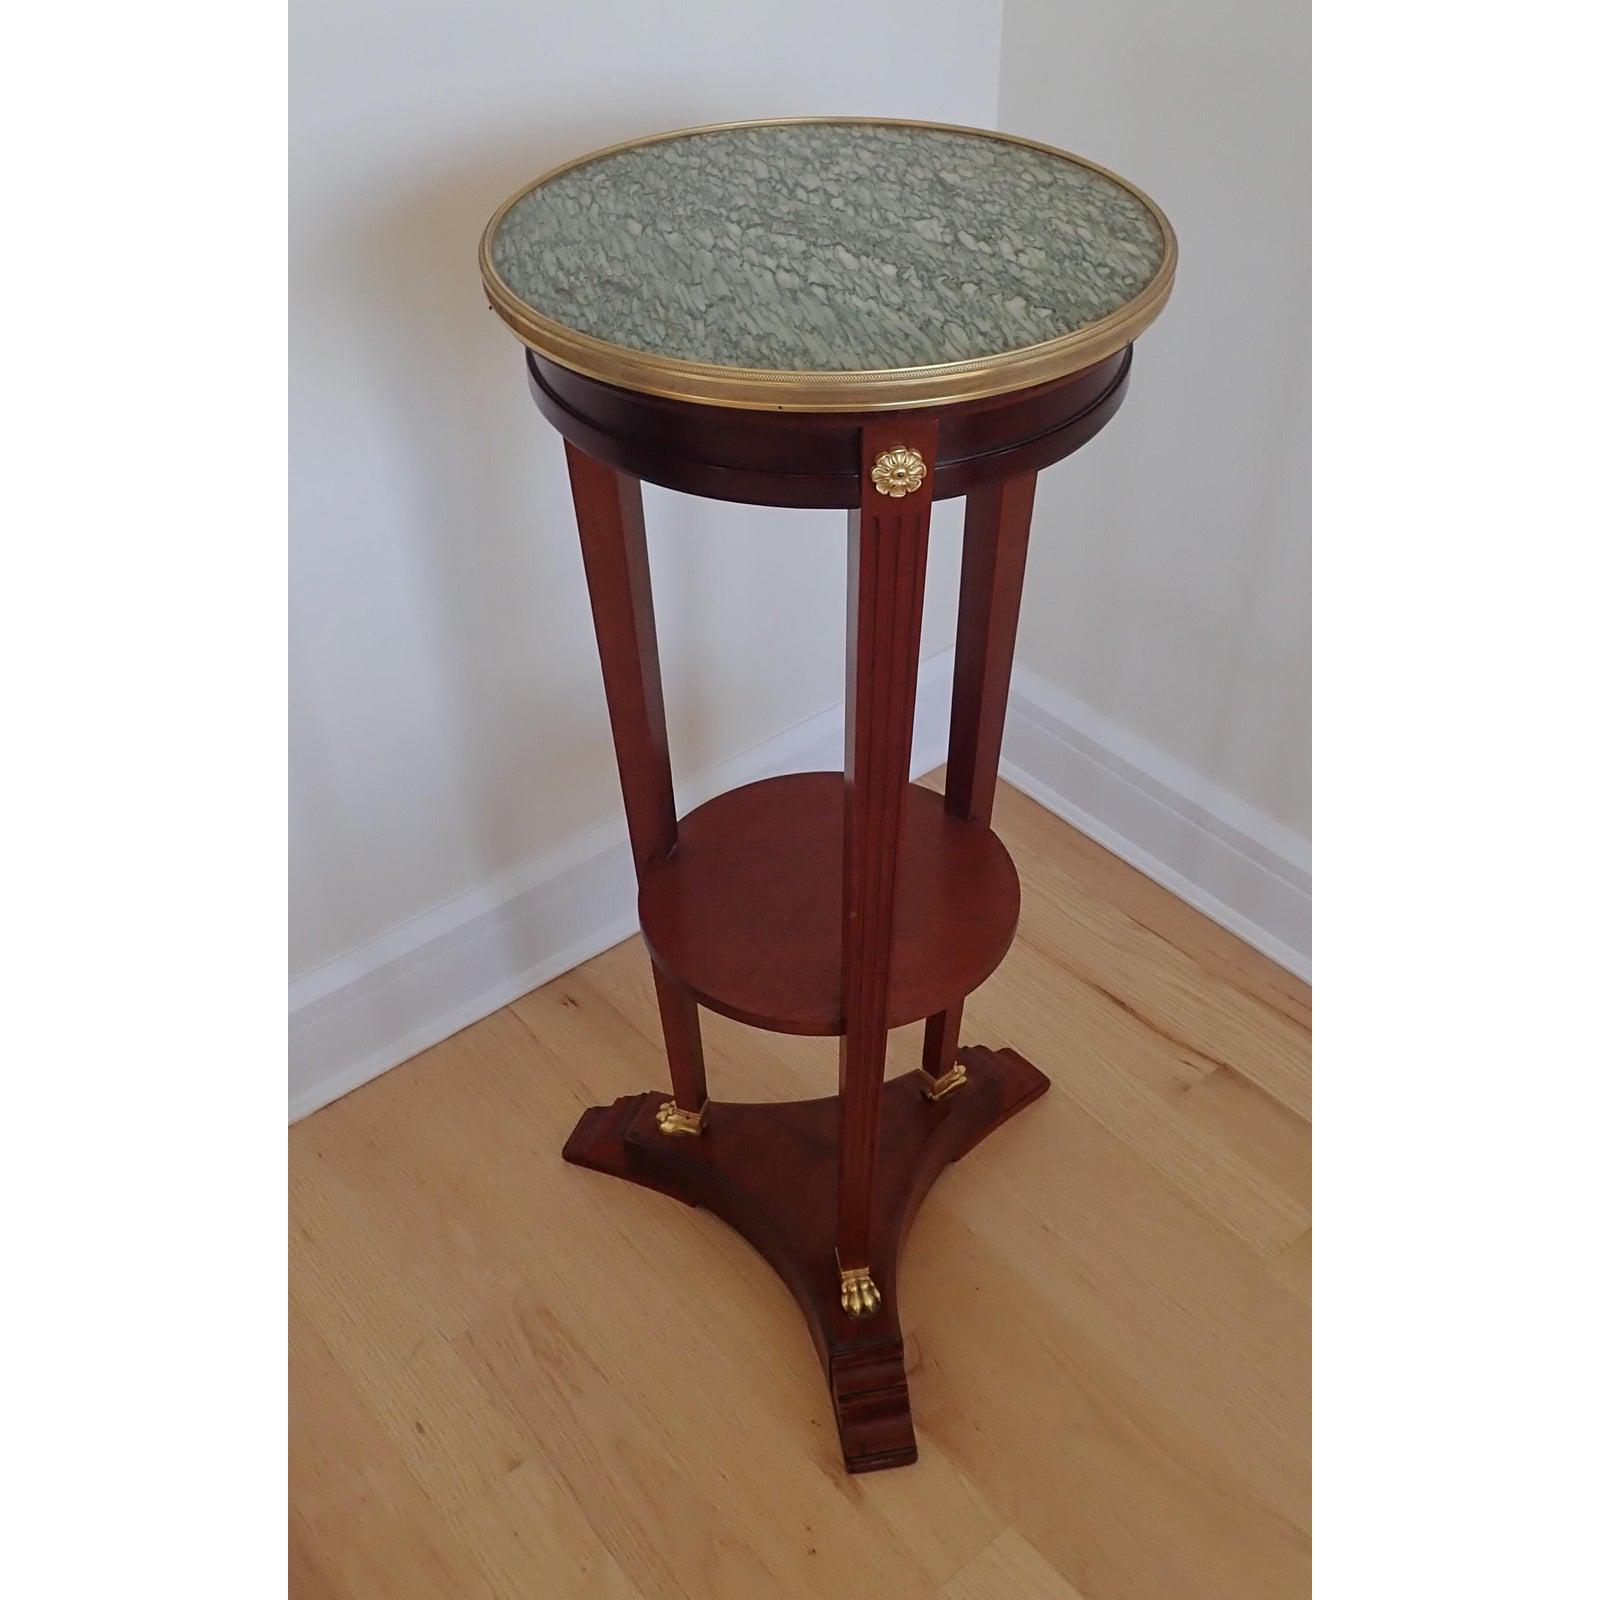 Mahogany Marble Top Pedestal. Marble top with Doré bronze gallery ring and feet . Height of shelf 15 1/2 inches. Triangular base approximately 19 inches. Diameter of shelf approximately 11 inches. less